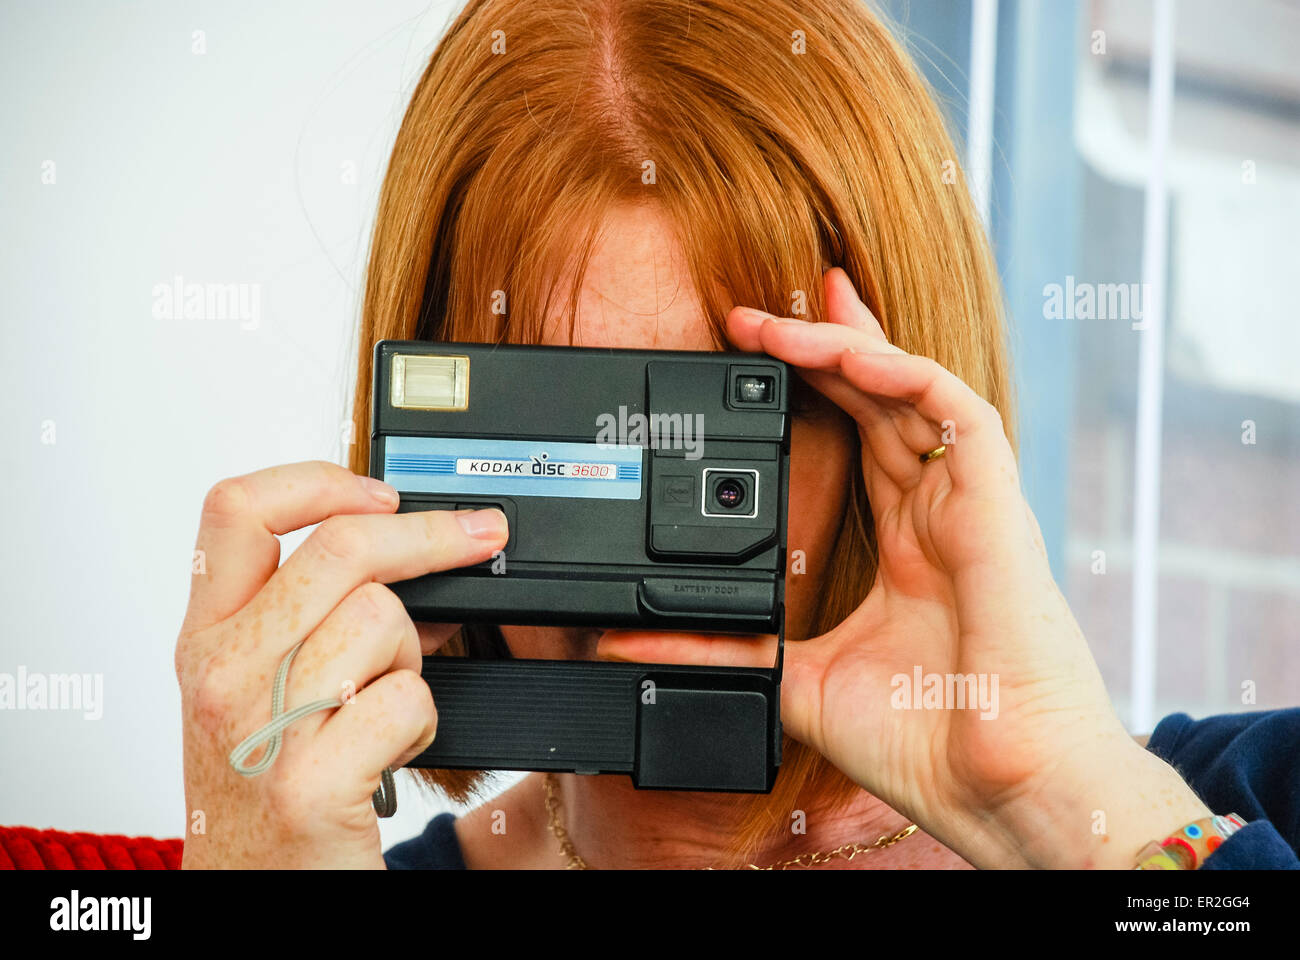 Redhaired woman uses a Kodak Disc camera which were popular during the 1980s. Stock Photo